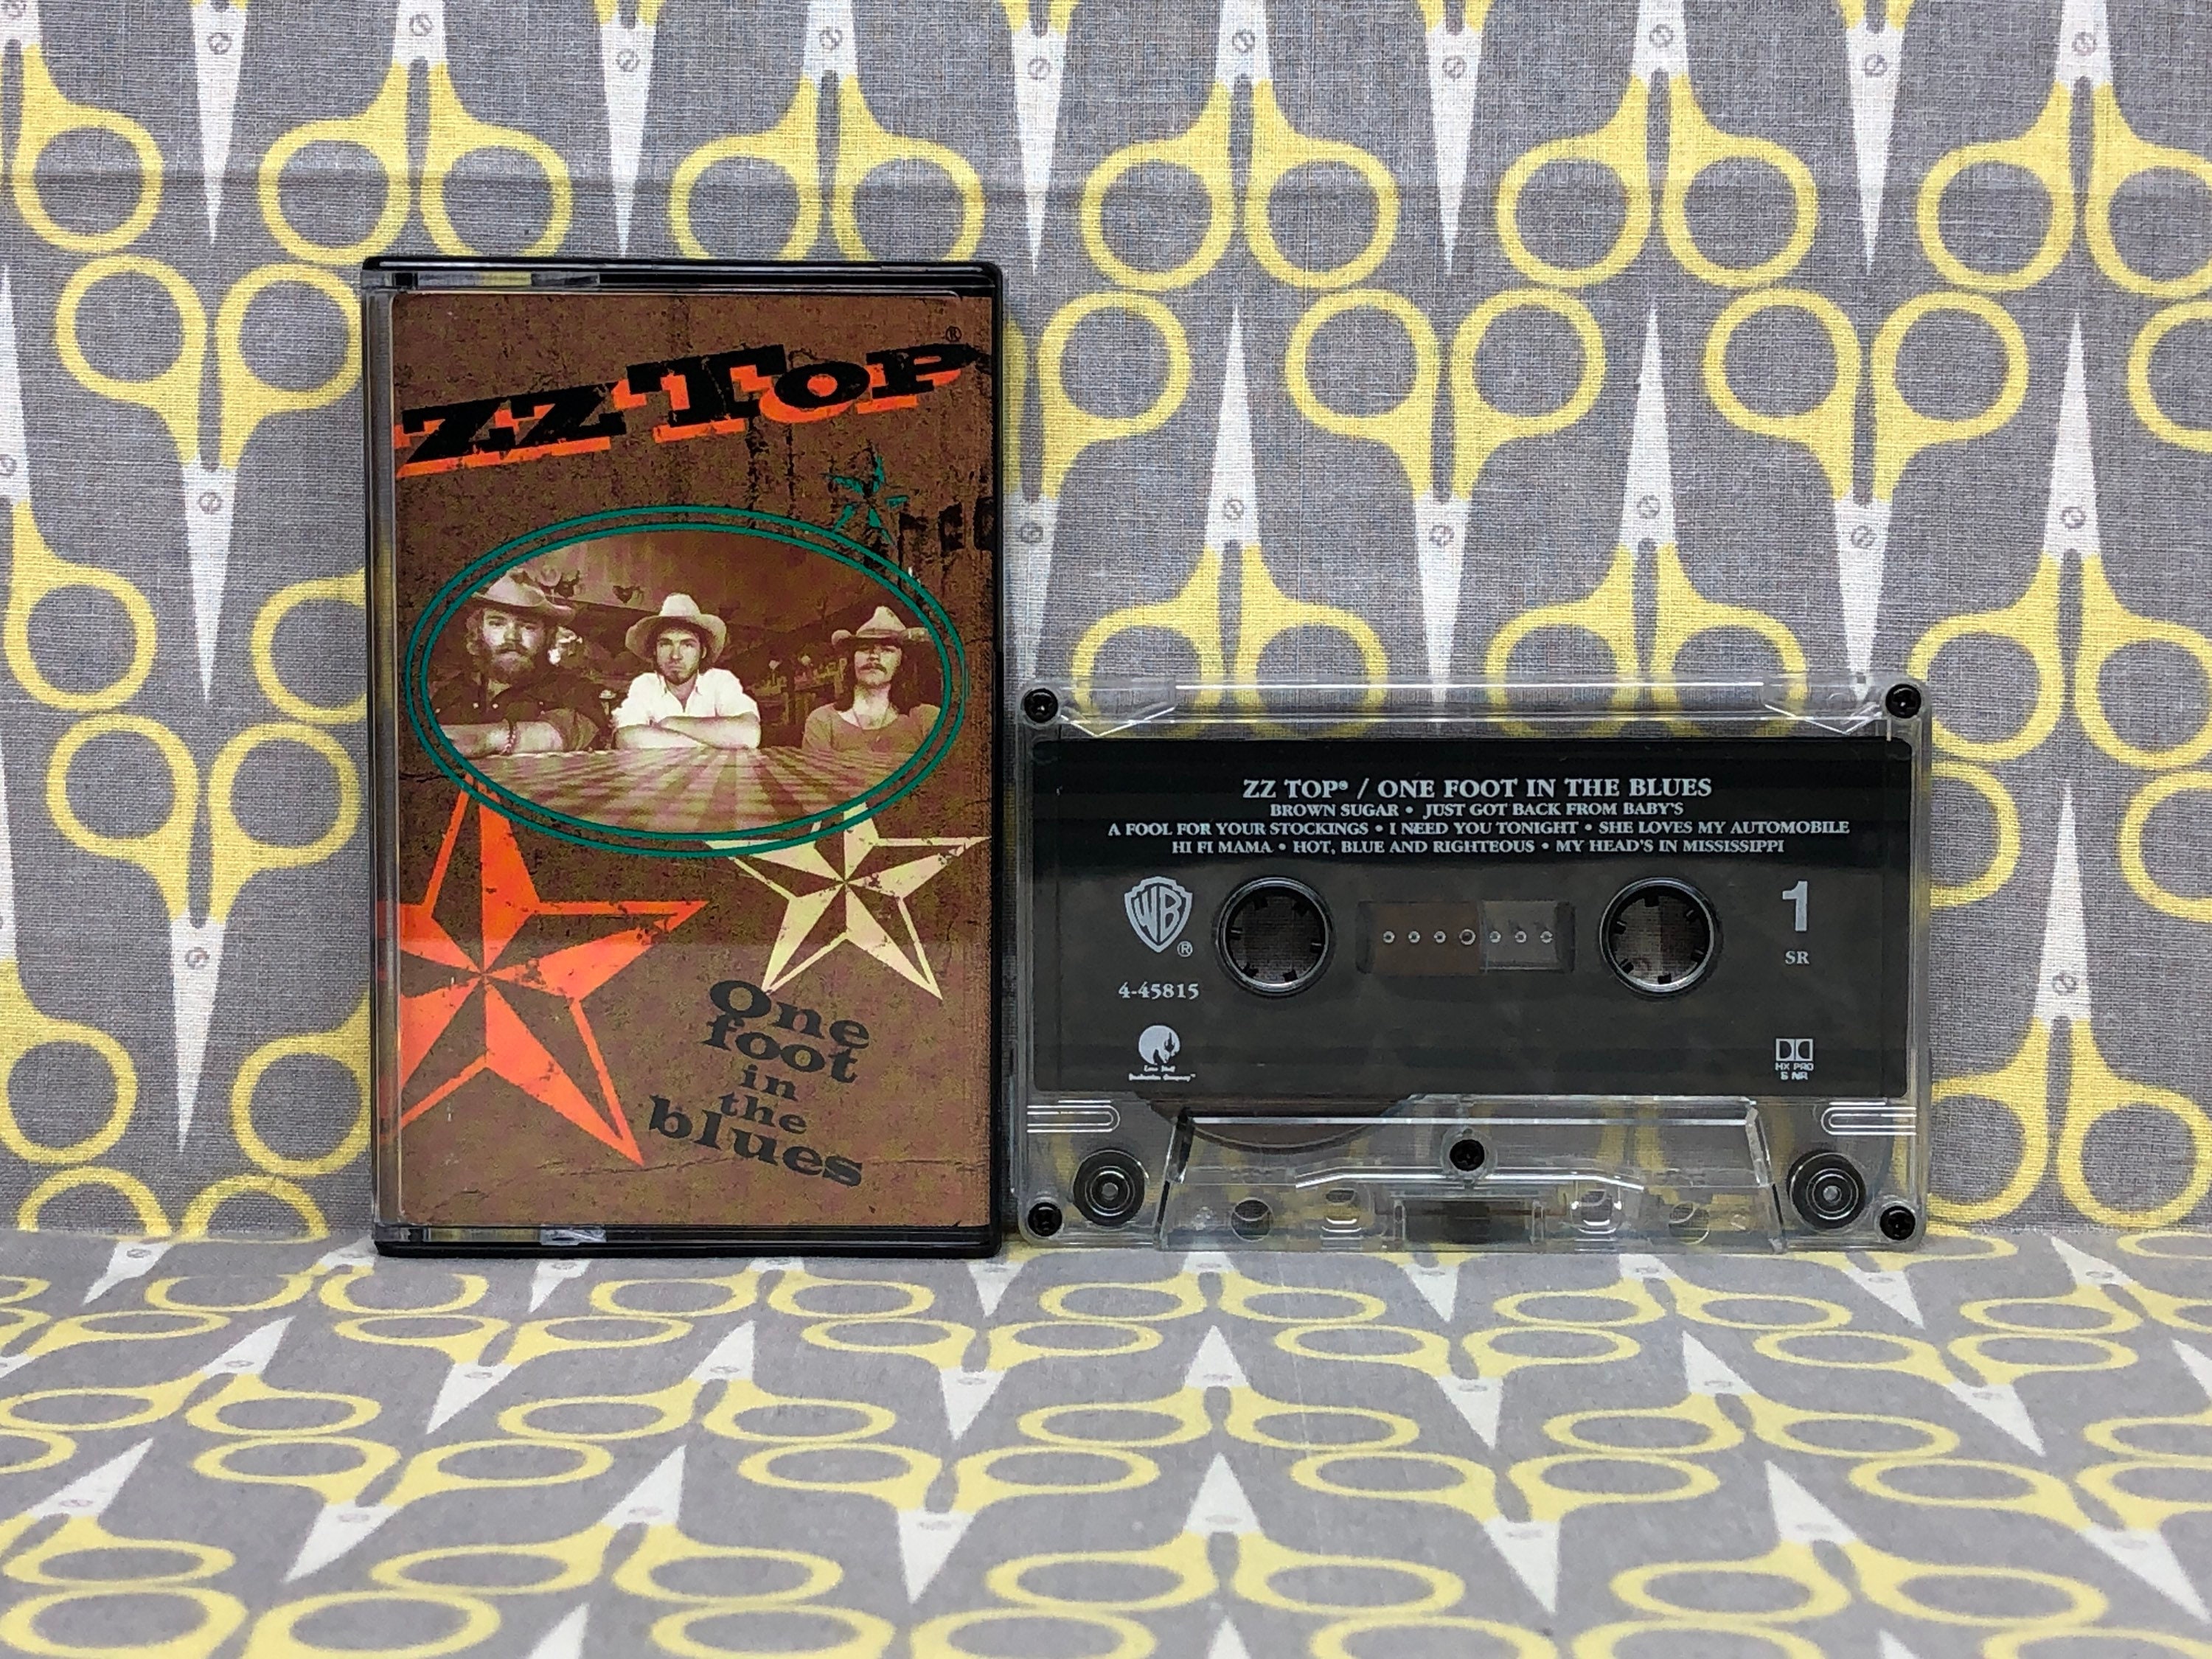 fuzzy elektropositive vask One Foot in the Blues by ZZ Top Cassette Tape Vintage Music - Etsy